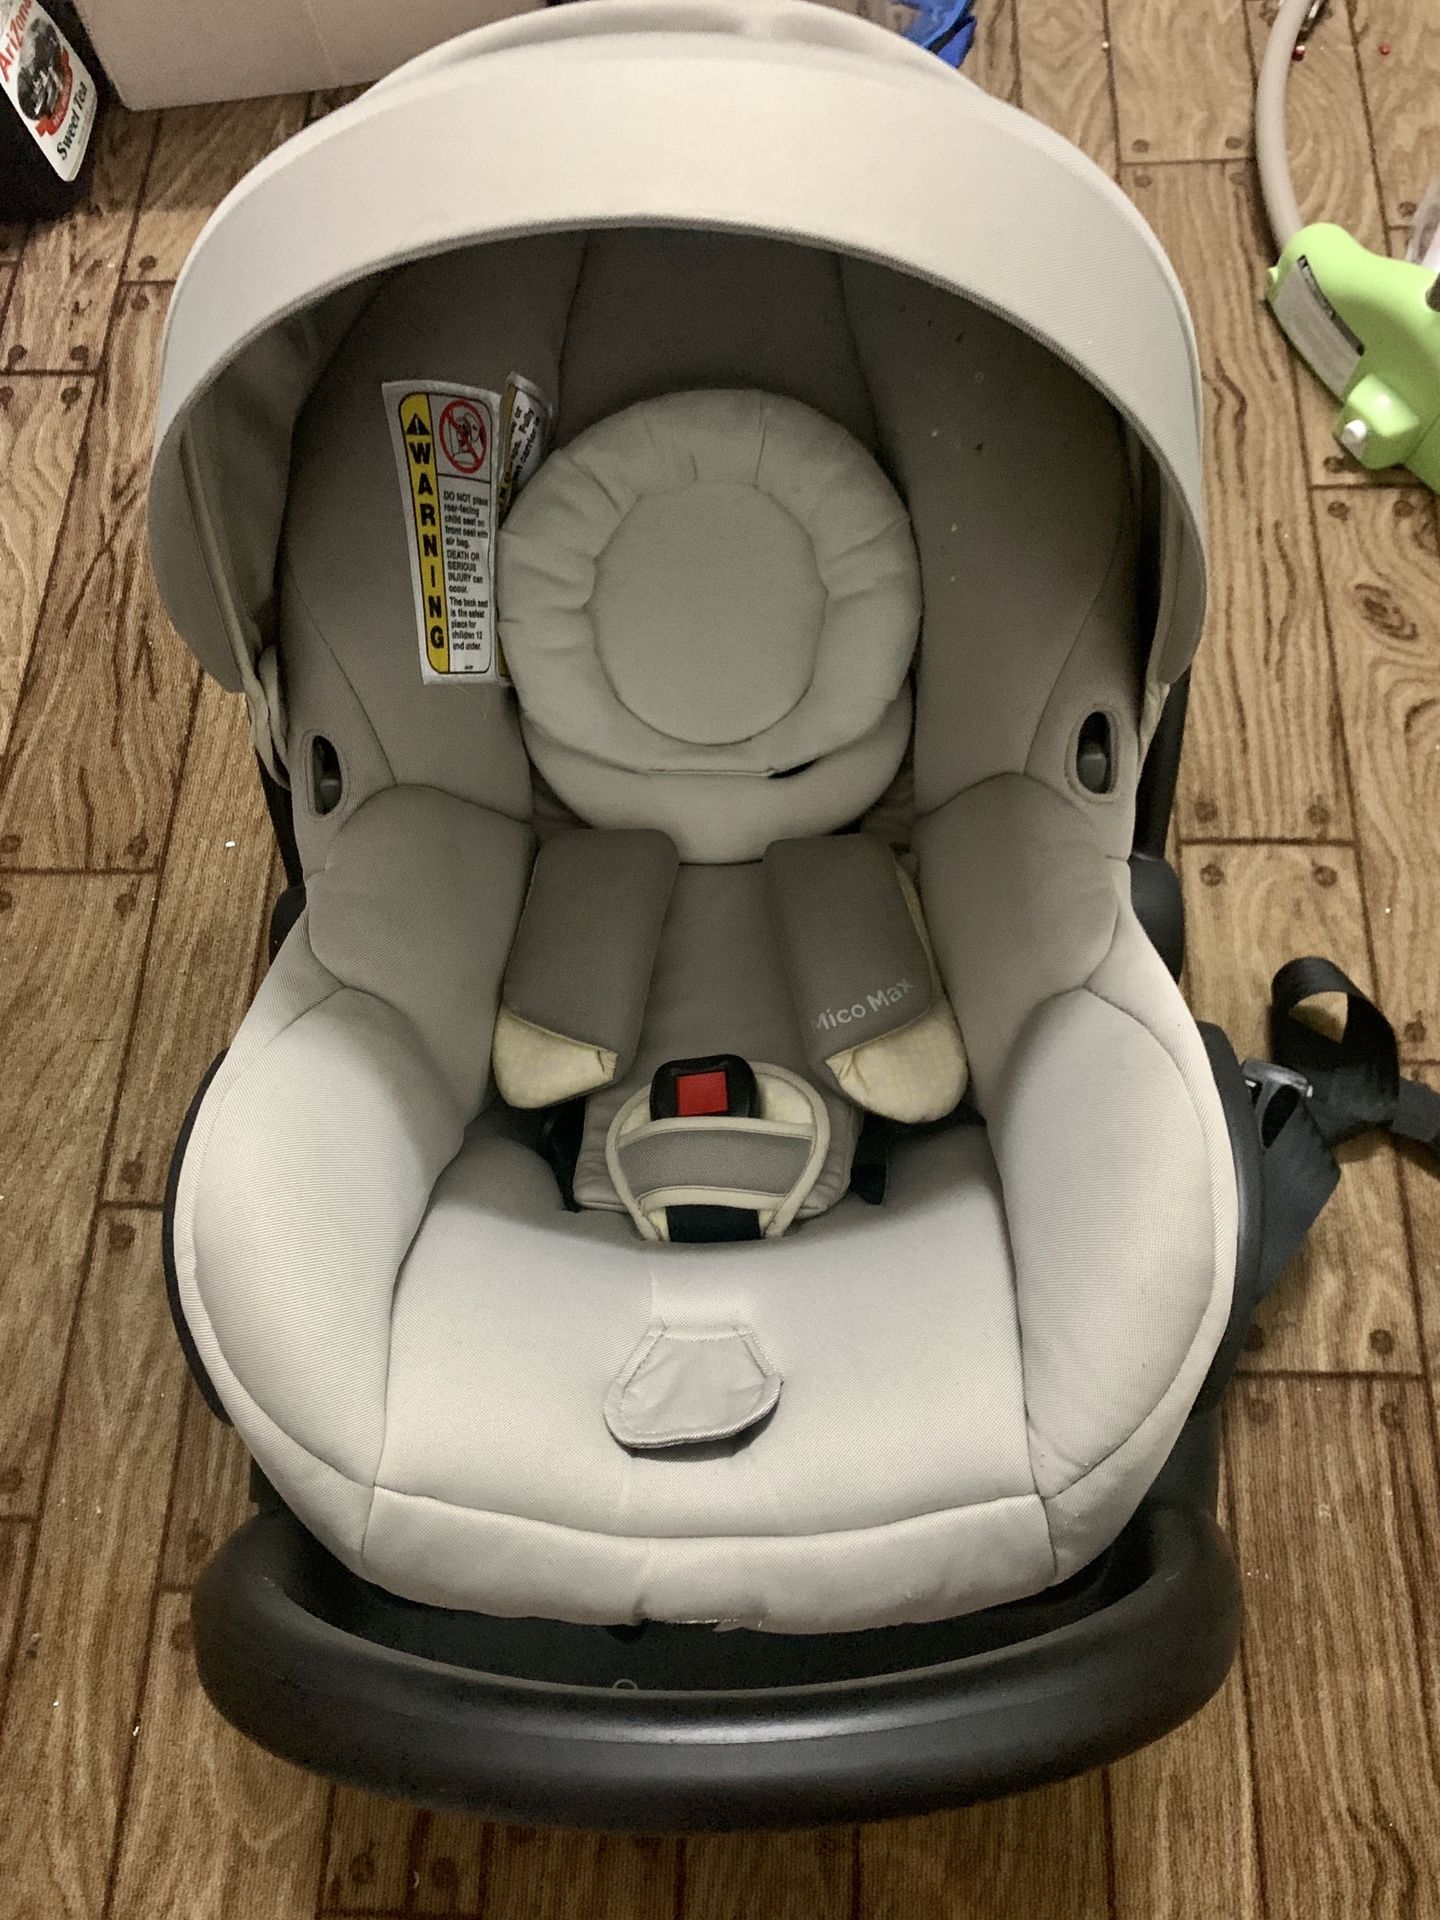 LIKE NEW $250 Maxi cosi mico max 30 infant car seat MOON BIRCH with base